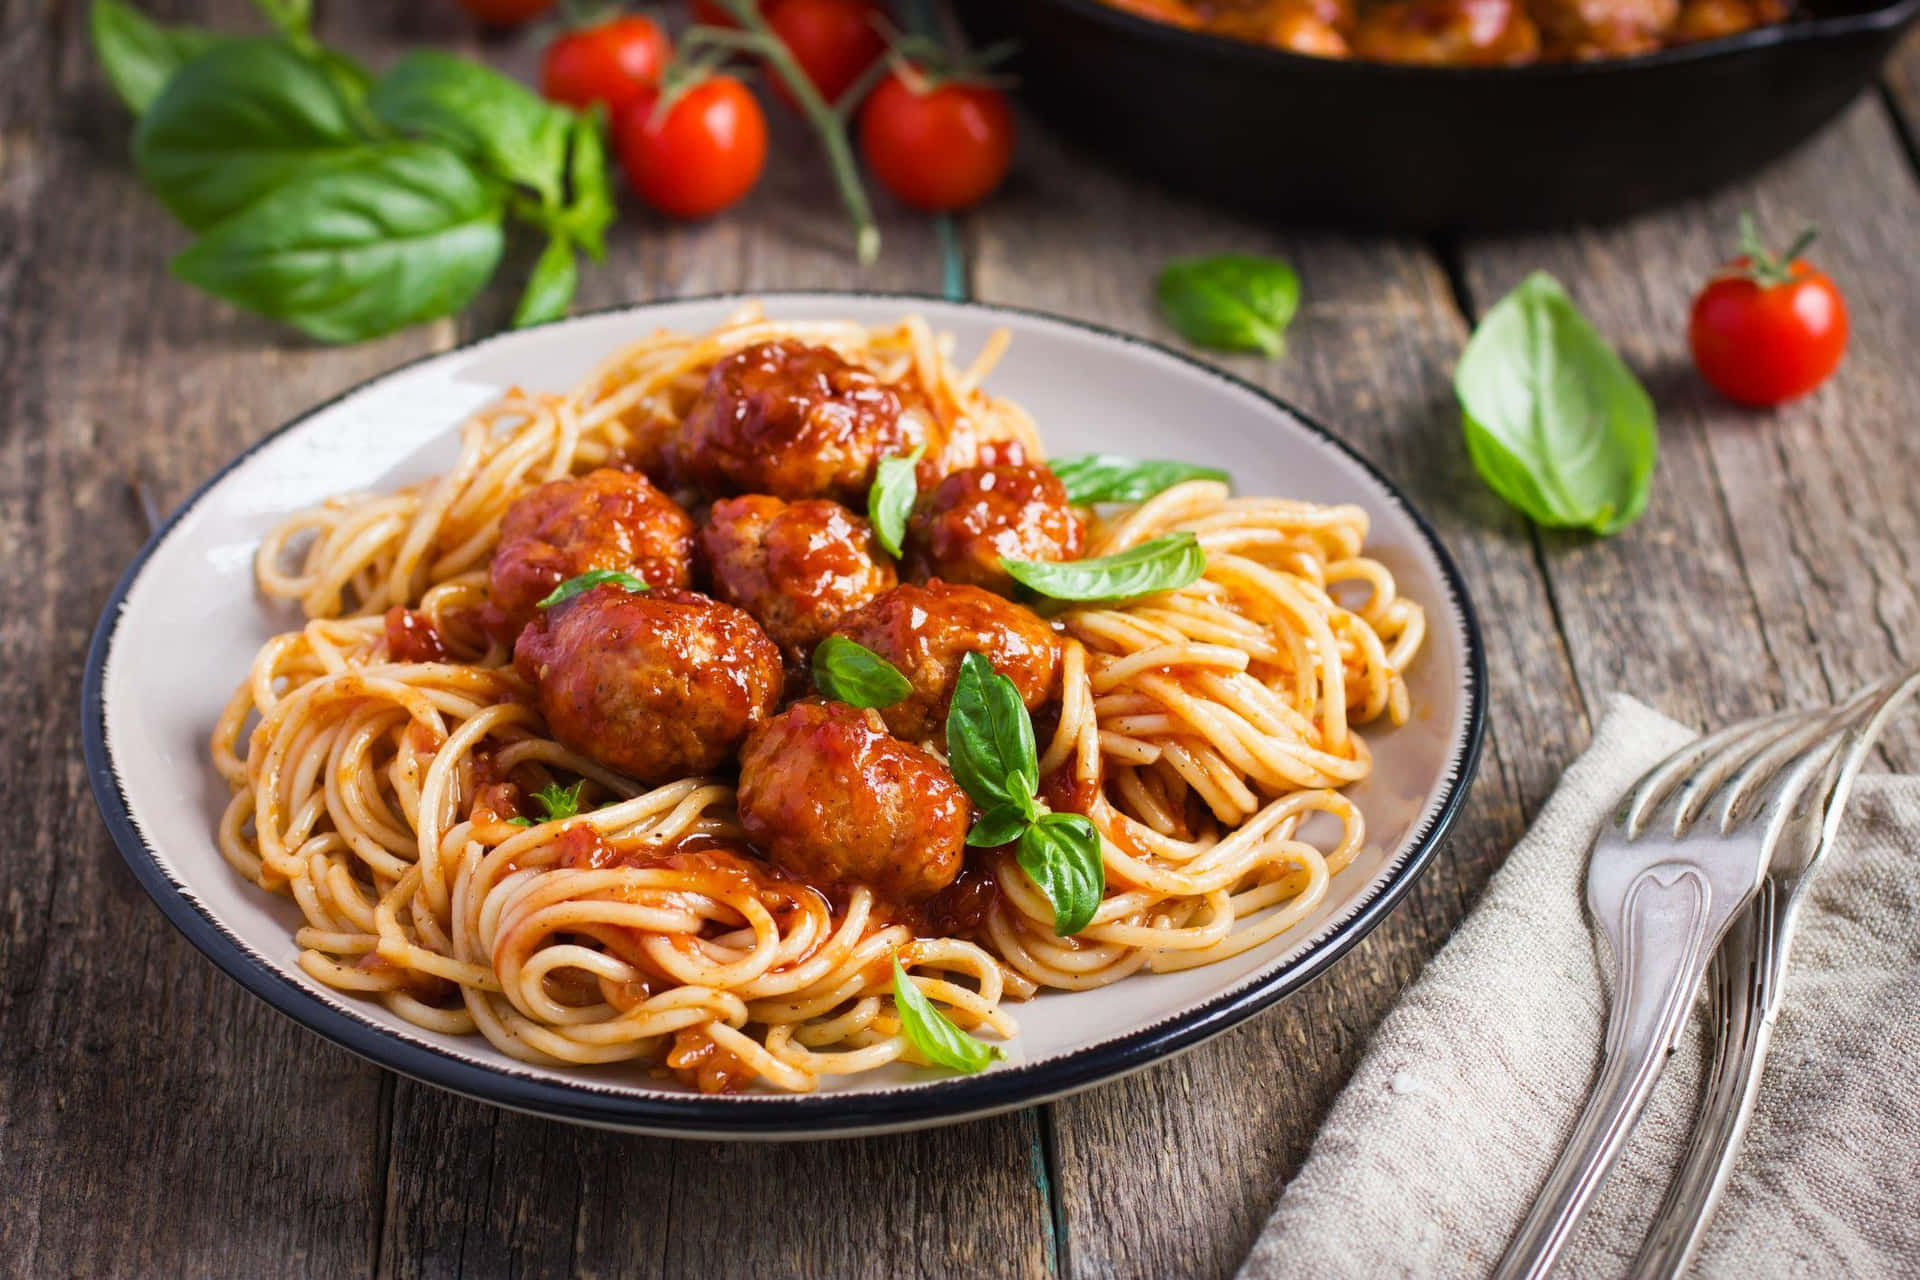 Spaghetti With Meatballs And Tomatoes On A Wooden Table